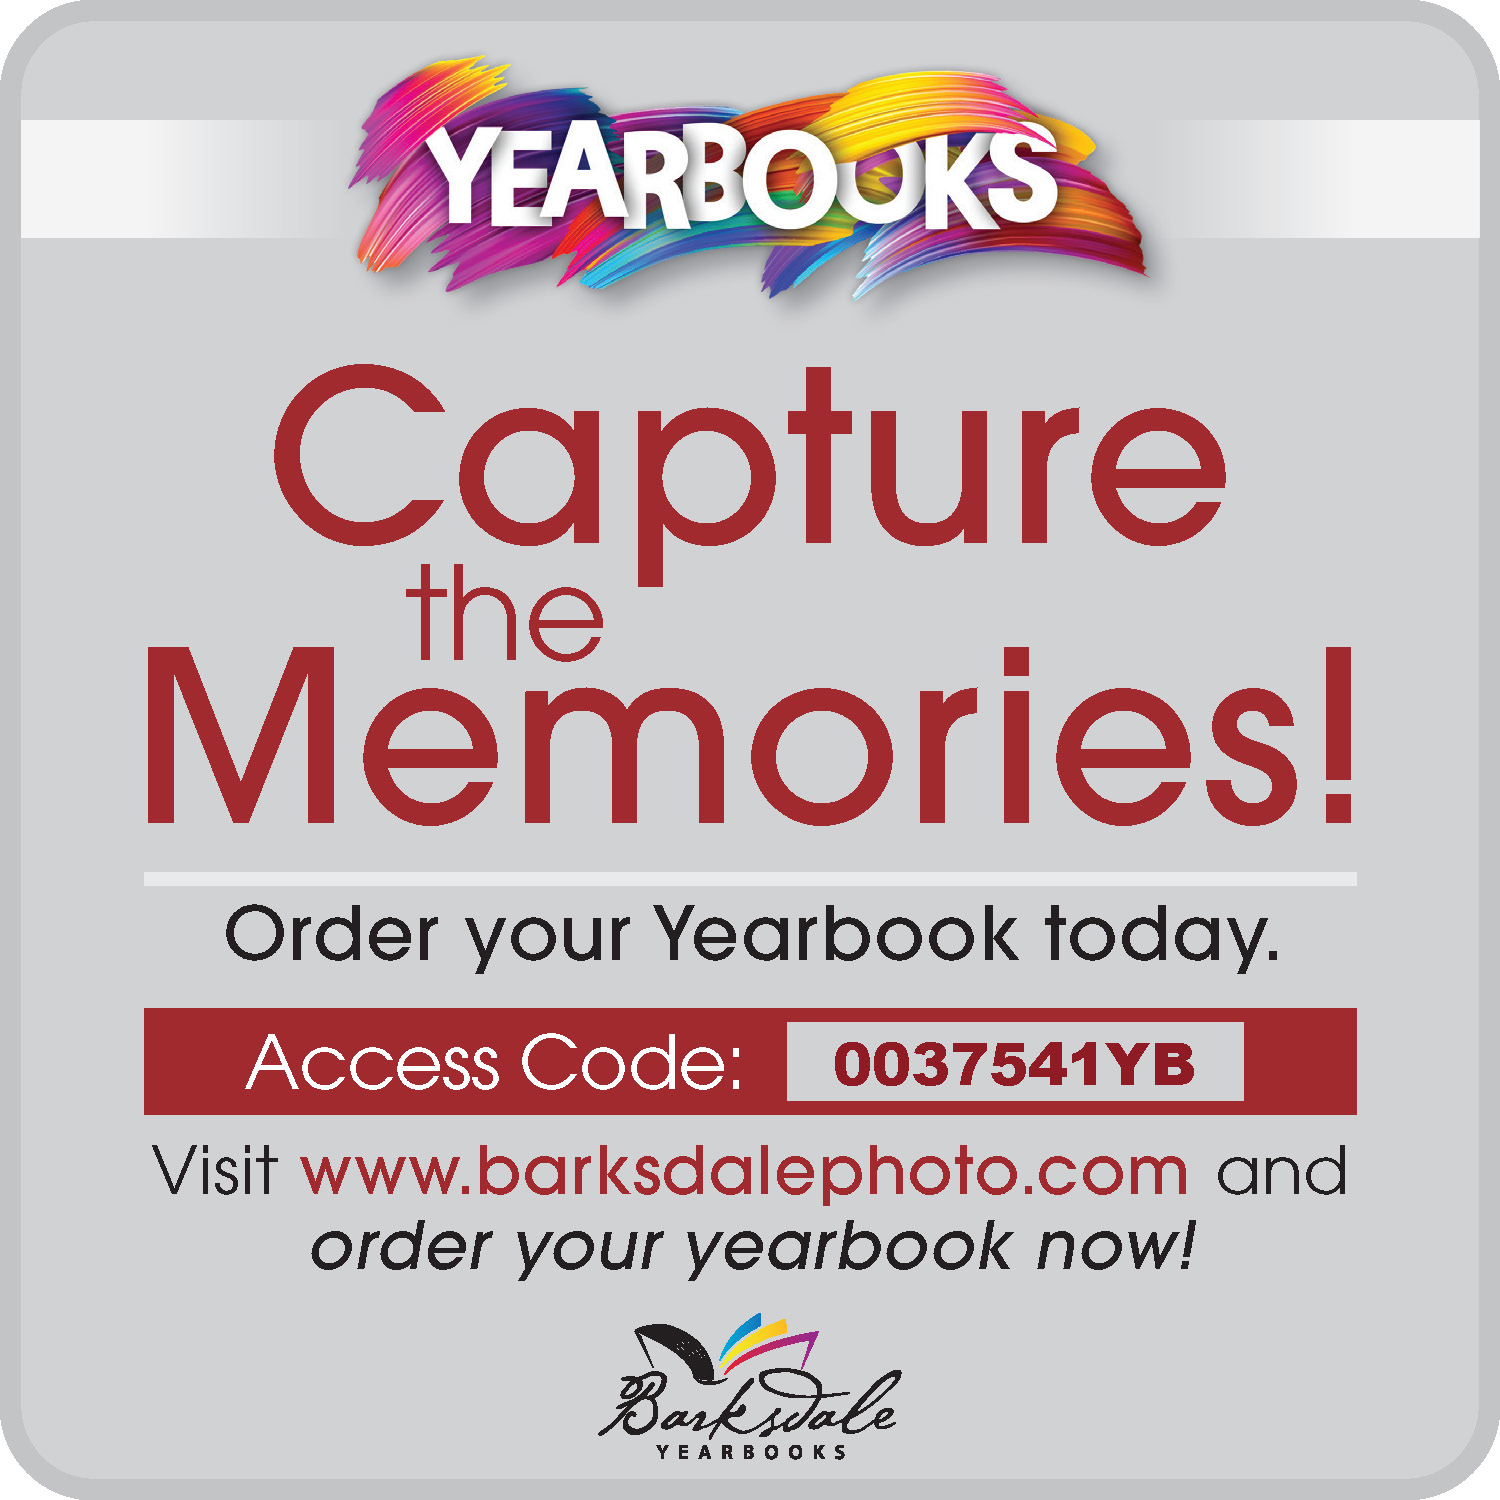 Capture the memories order your yearbook today, access code 0037541YB, visit www.barksdalephoto.com and order your yearbook now